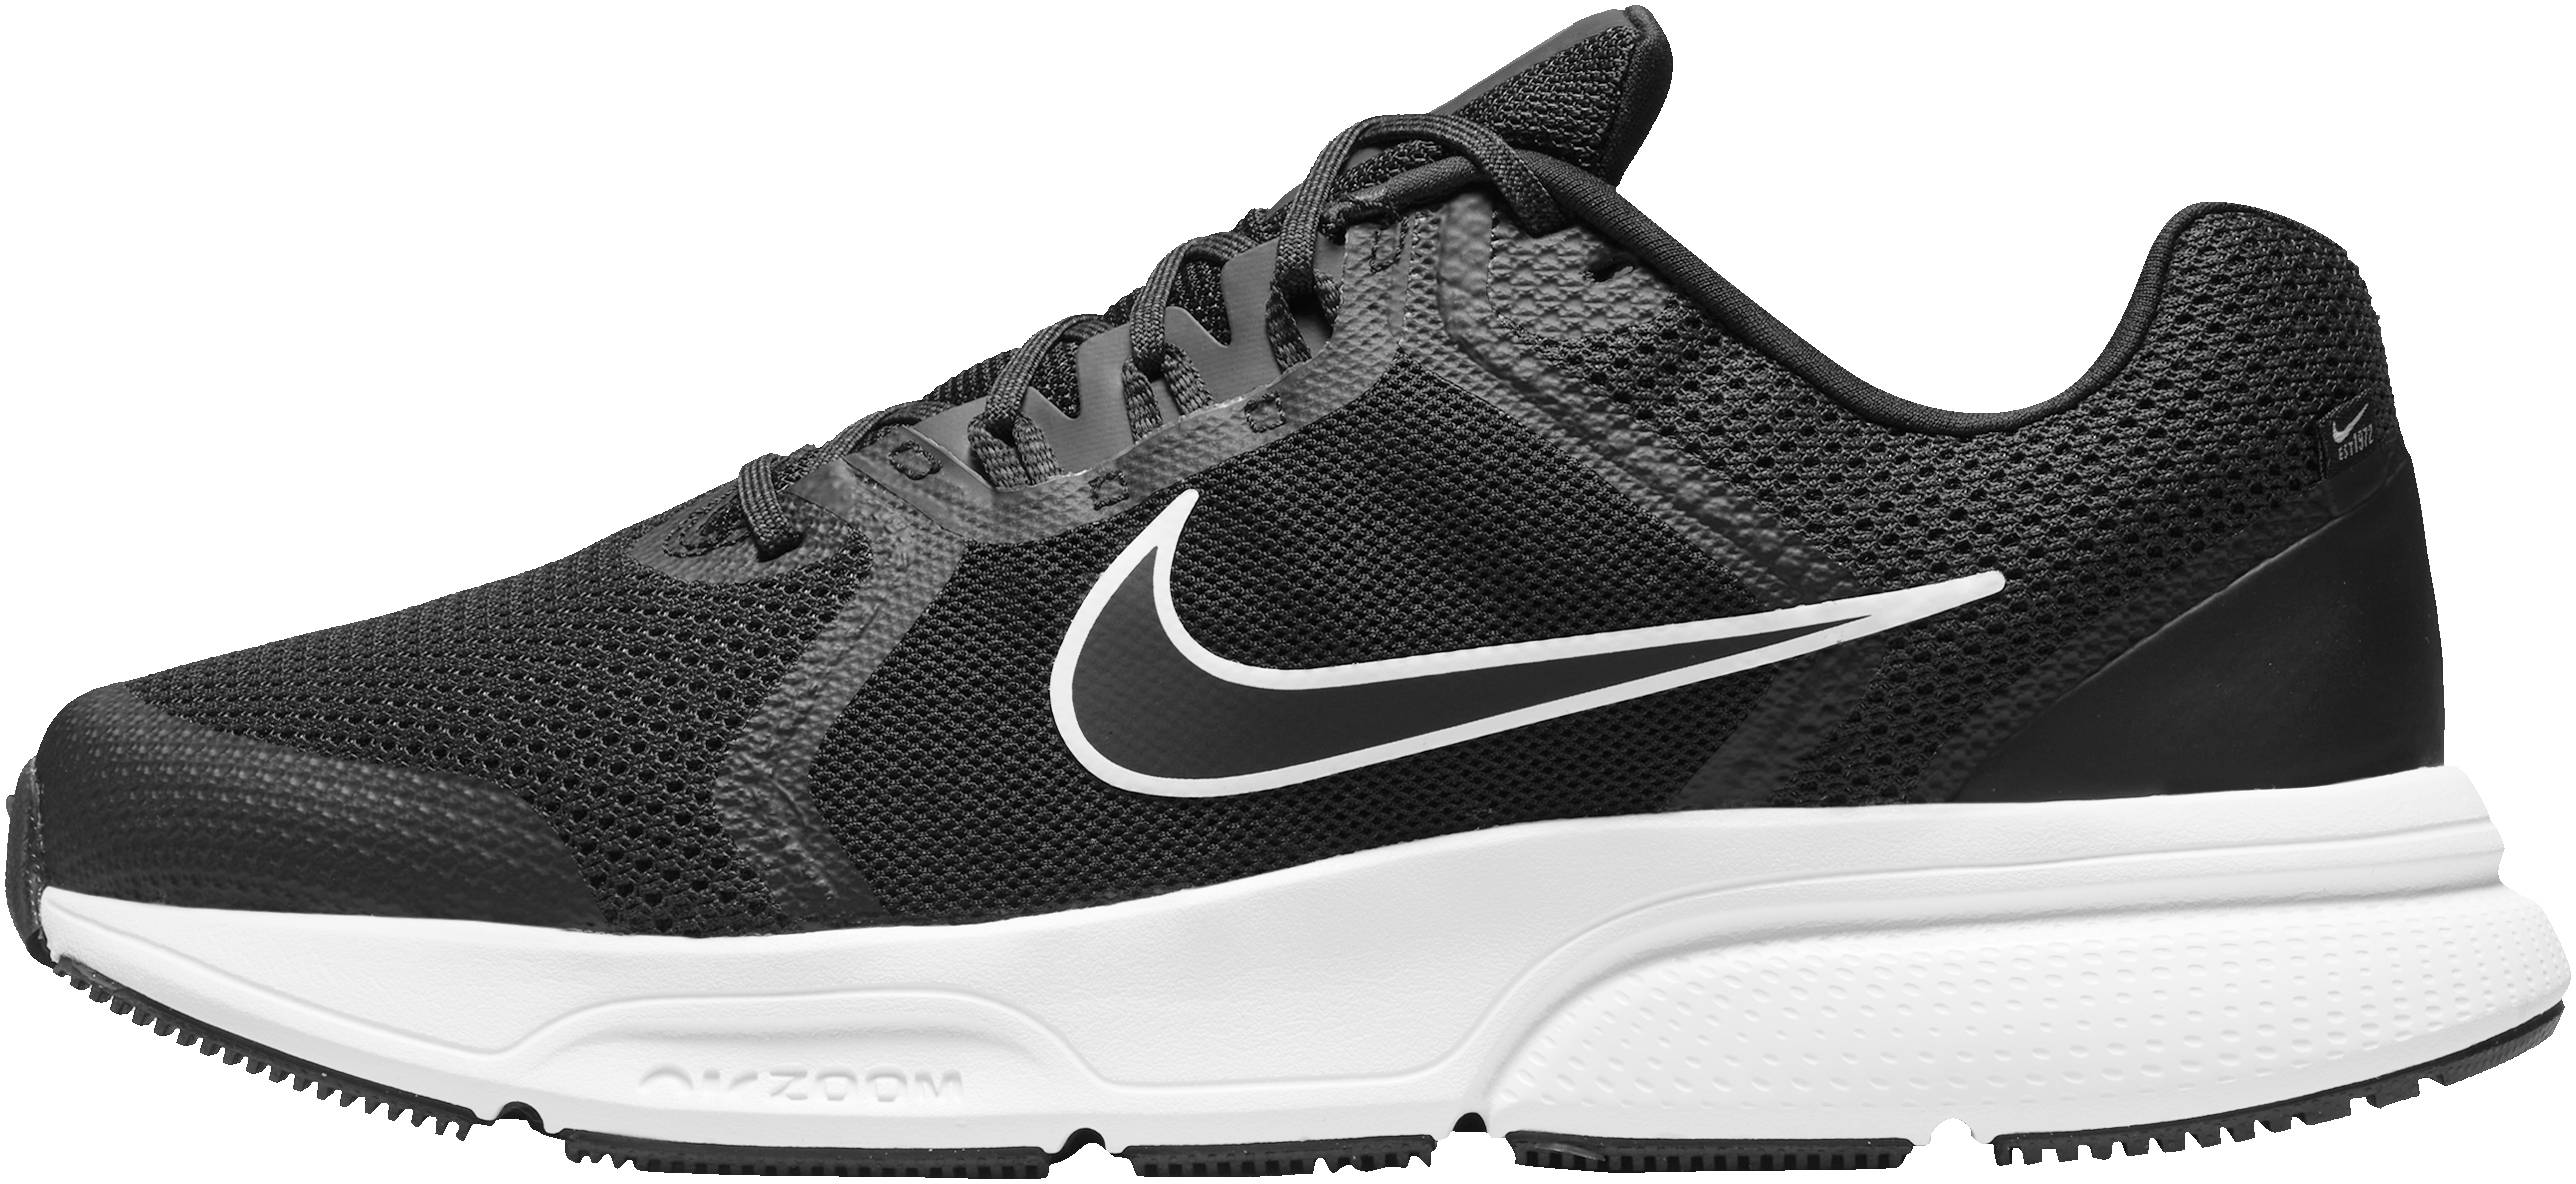 Nike Zoom Span 4 Review 2022, Facts, Deals | RunRepeat